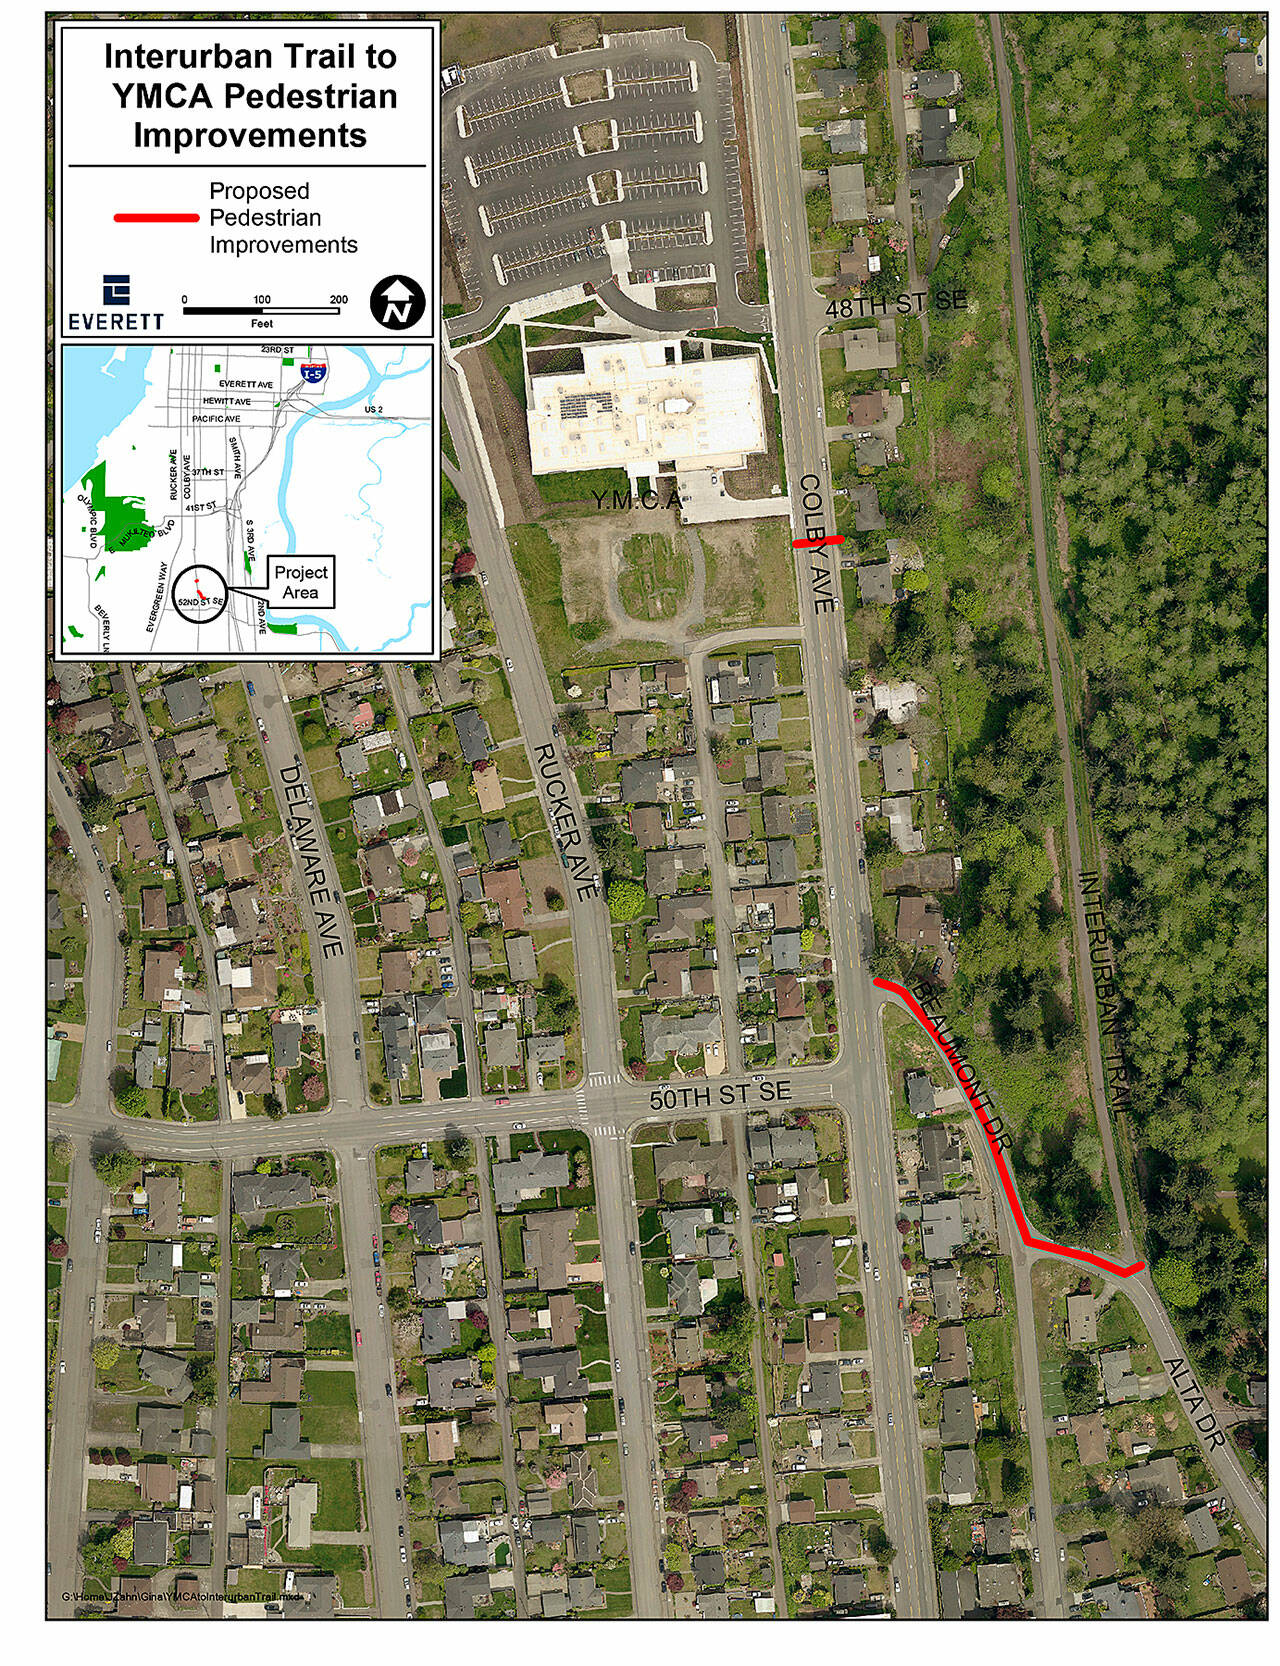 Everett Public Works is developing pedestrian improvements between the Interurban Trail and Colby Avenue and crossing the road to Emma Yule Neighborhood Park. (Everett)